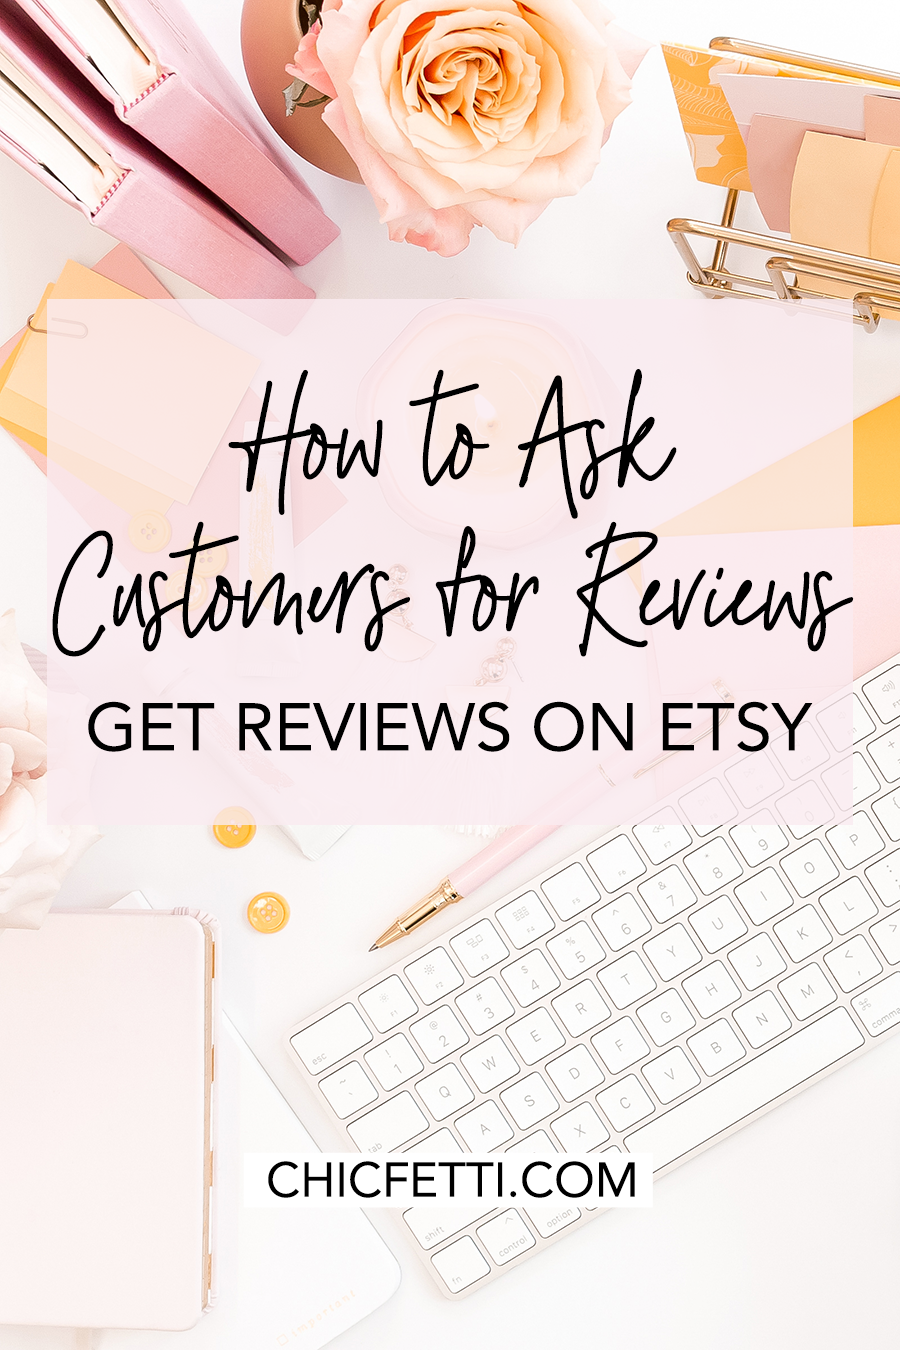 How to Ask Customers for Reviews on Etsy